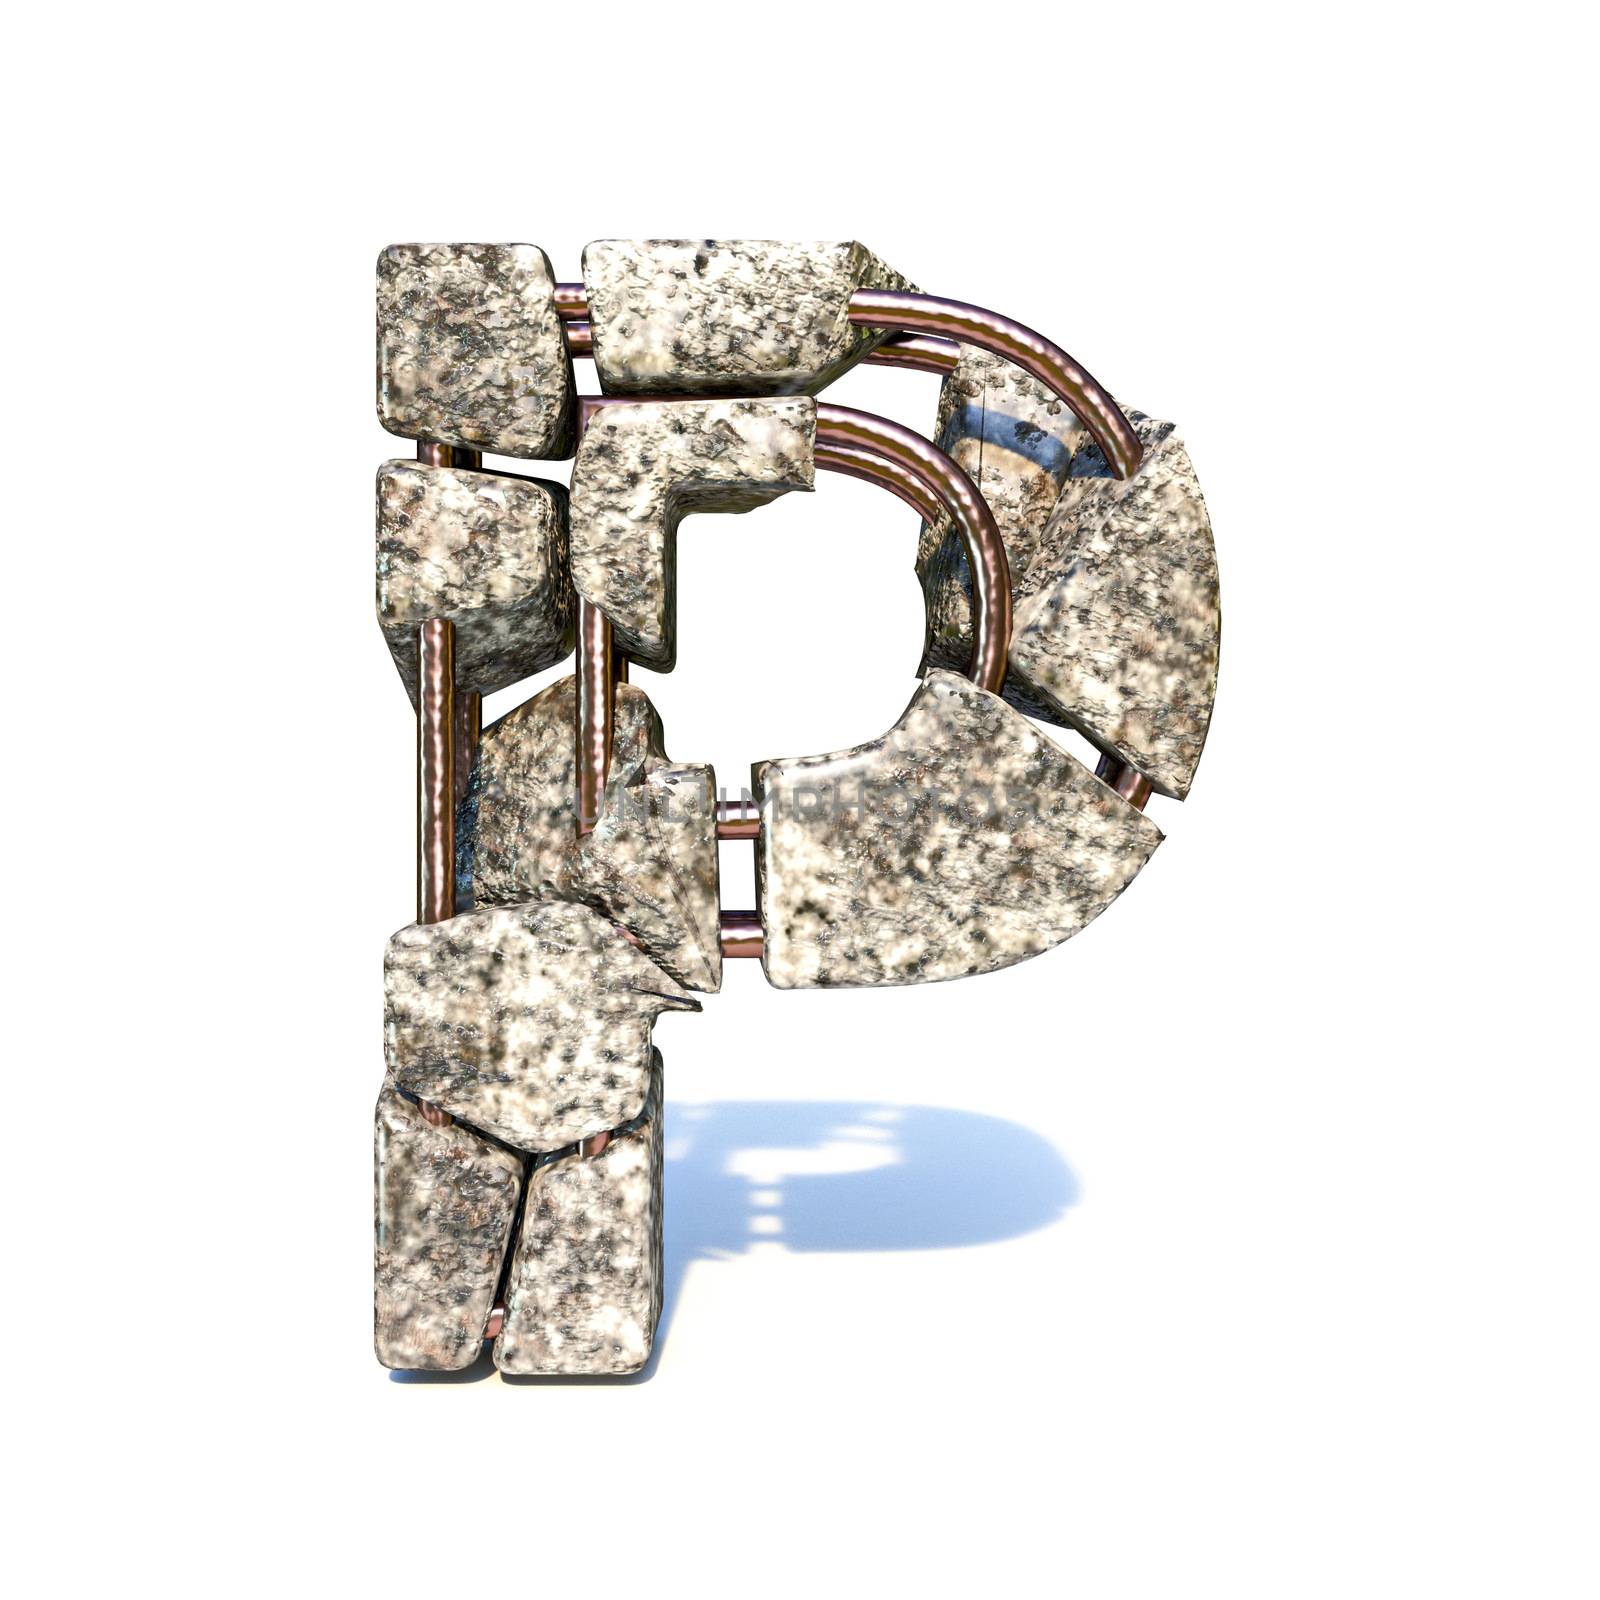 Concrete fracture font Letter P 3D render illustration isolated on white background